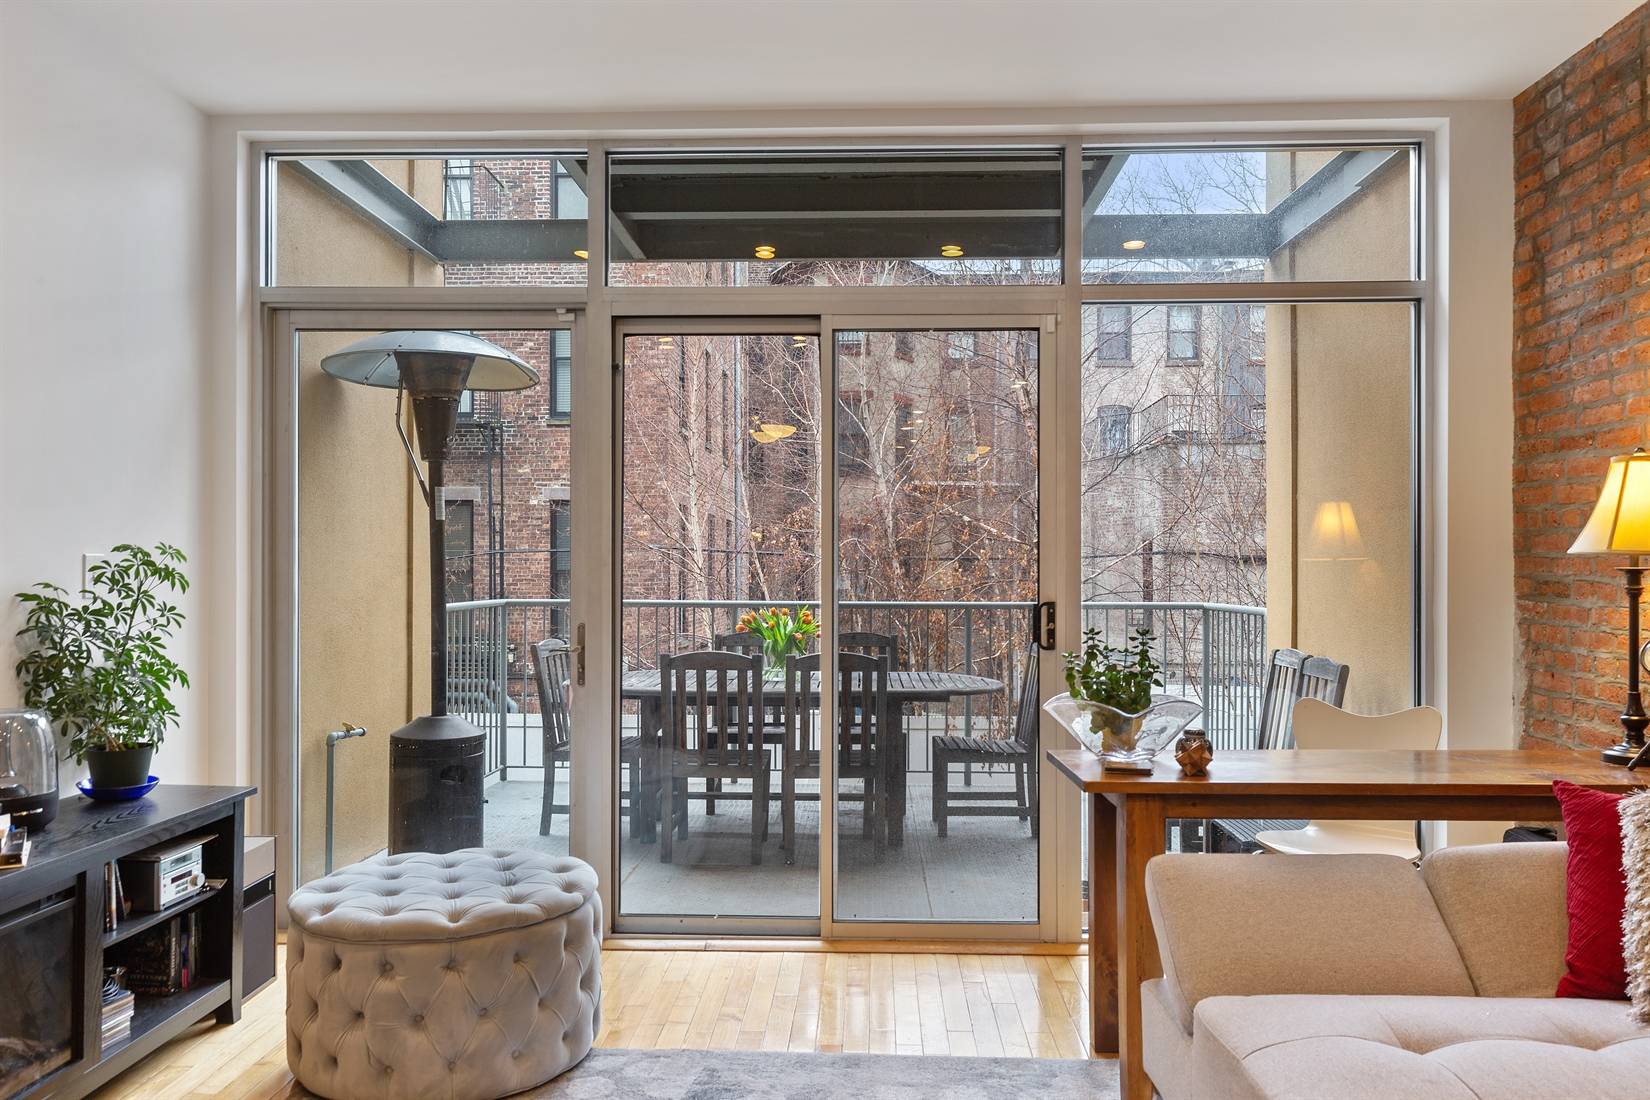 Seven outdoor spaces ! Two family townhouse with on tree lined block in Central Harlem.